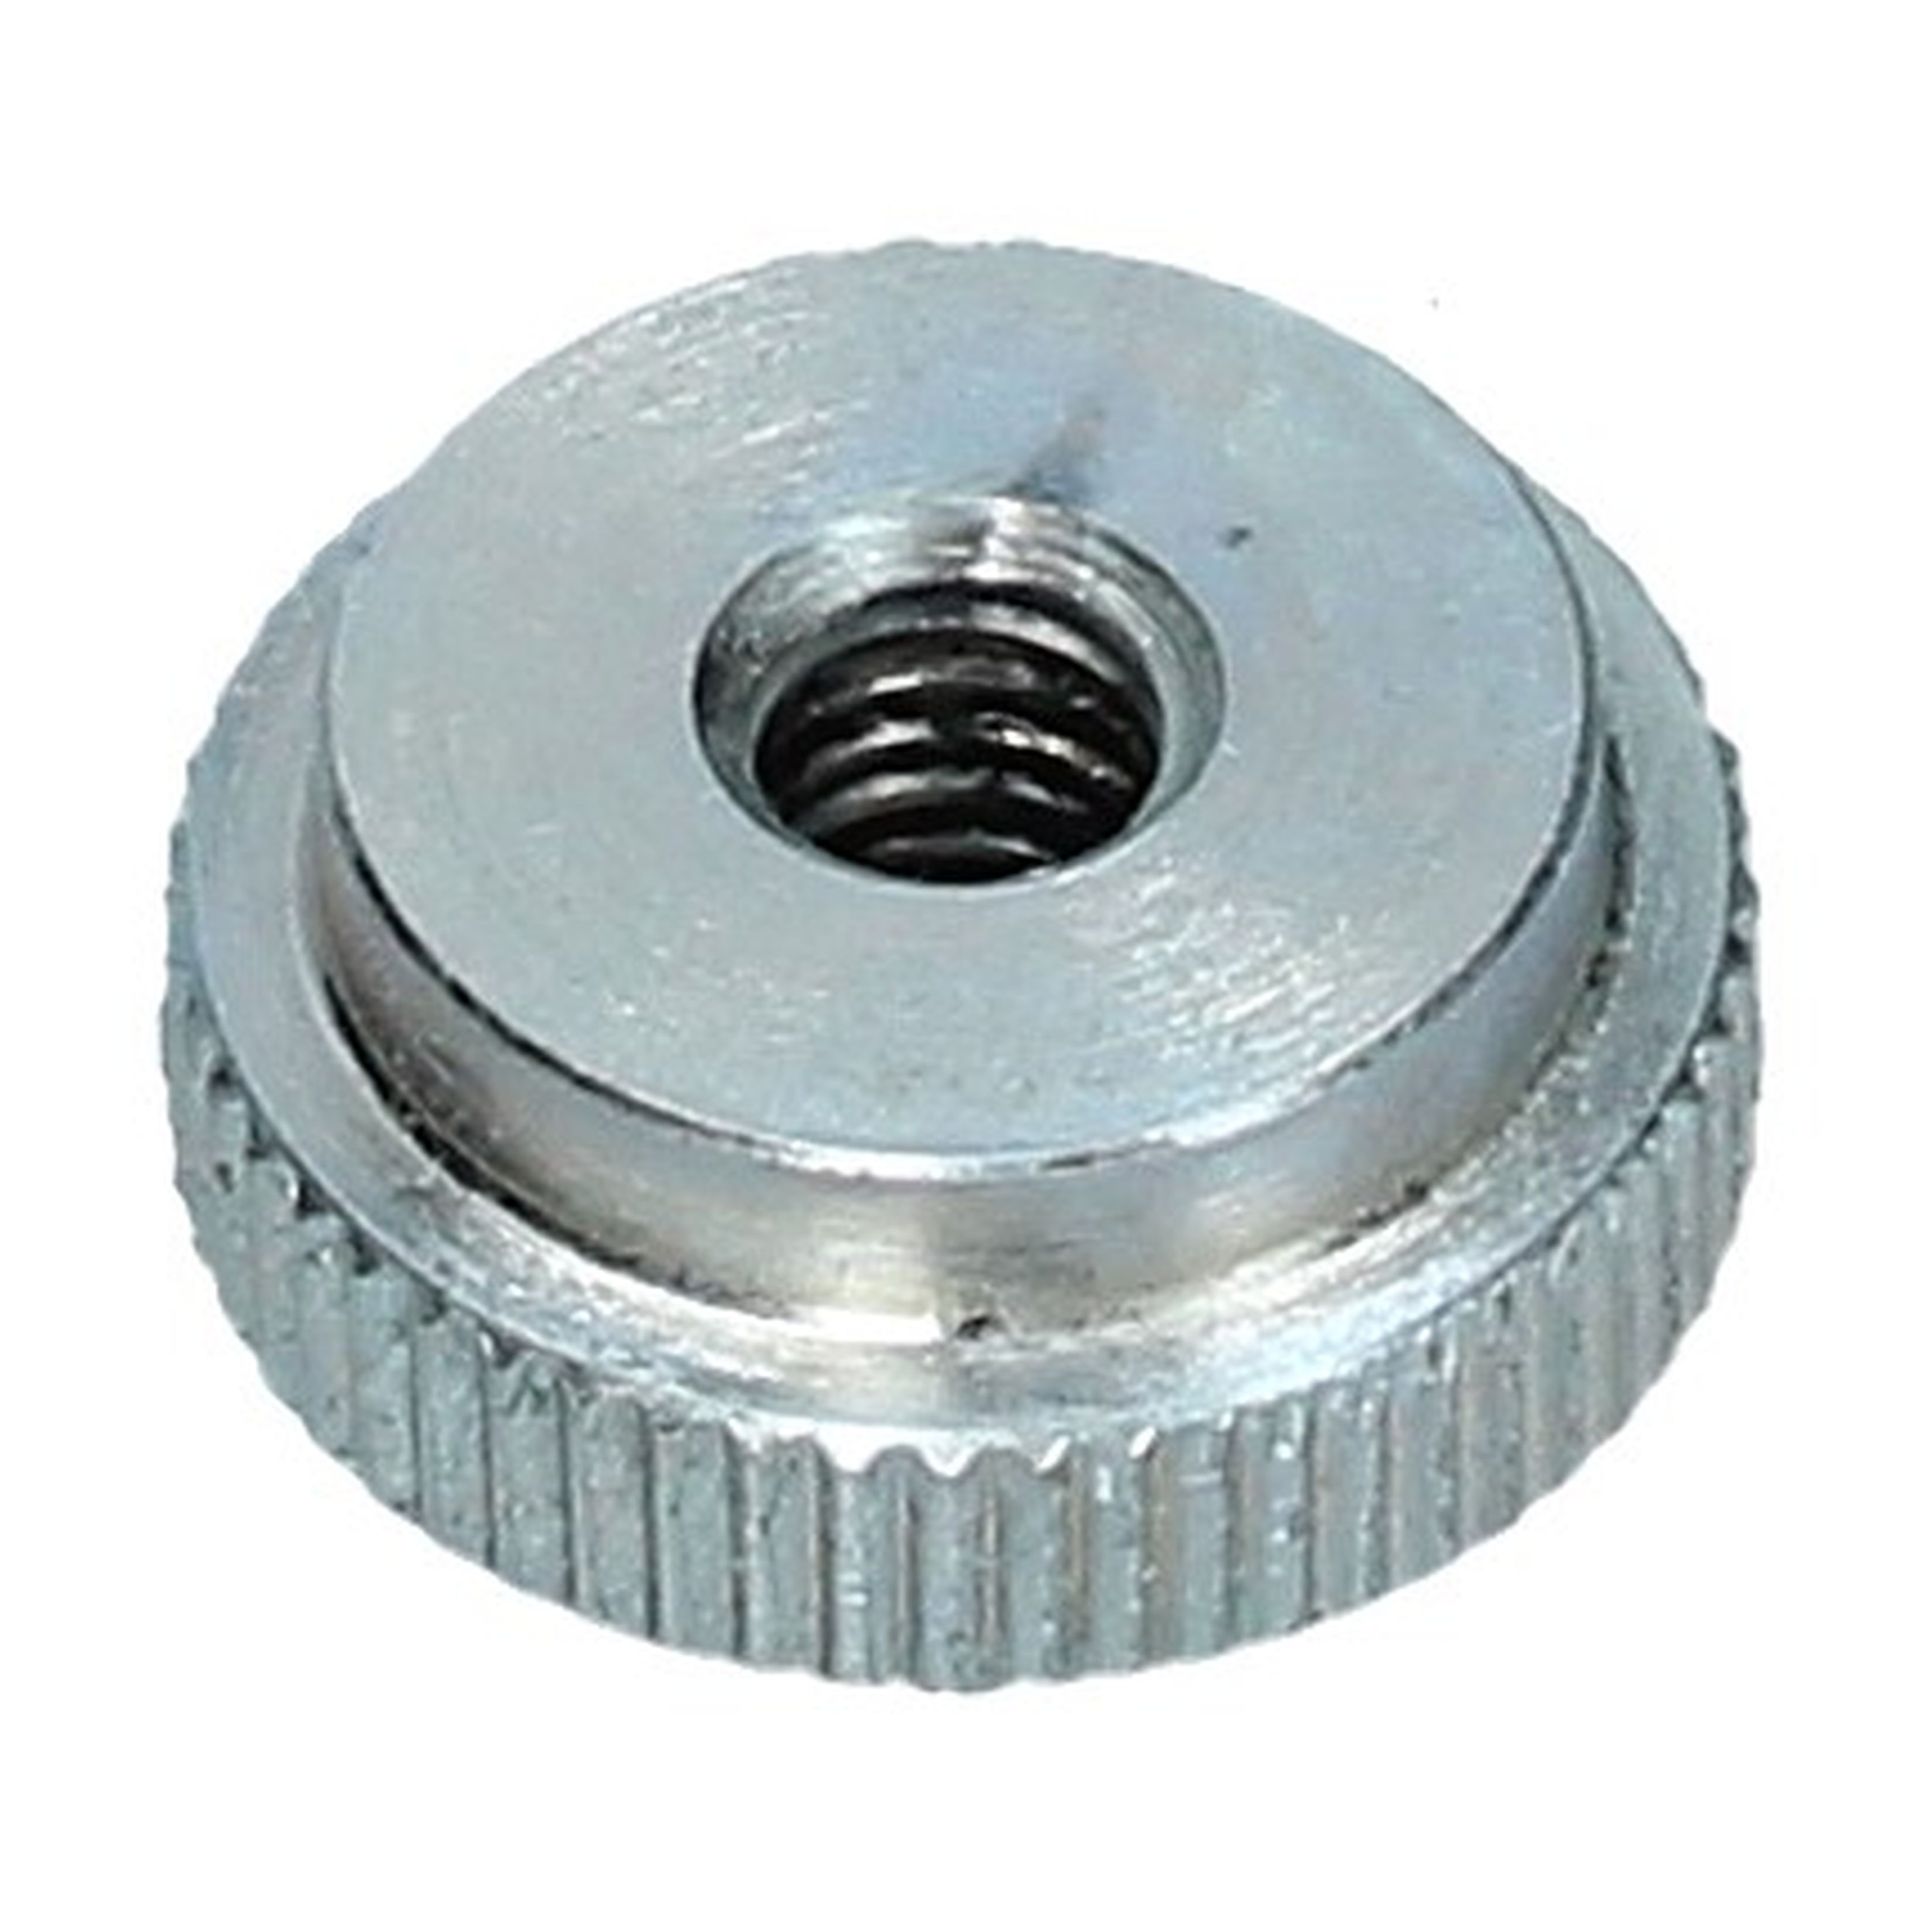 Air Cleaner Top Knurled Nut Silver